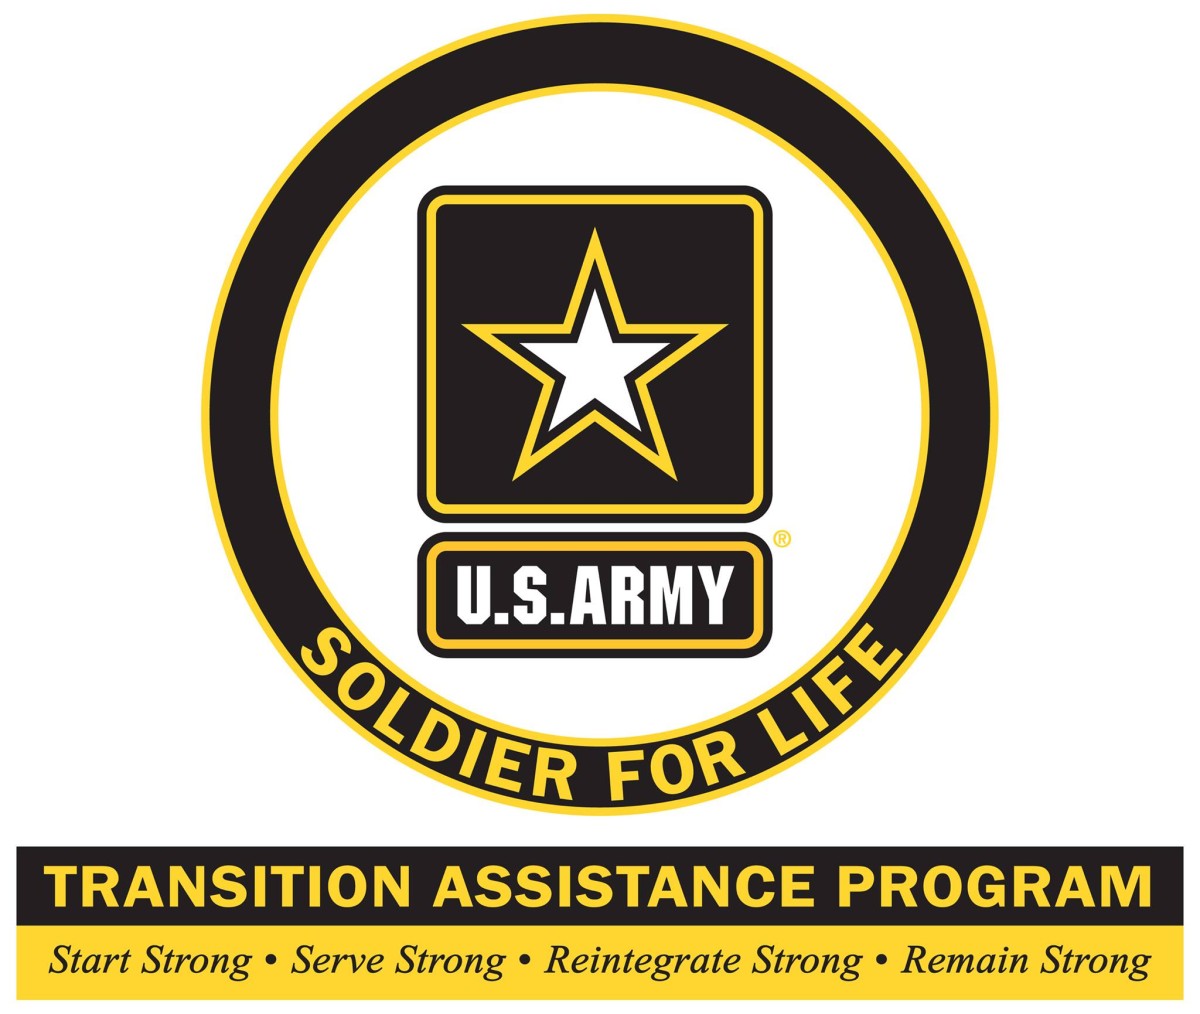 ACAP receives a new name, logo, philosophy: Soldier for Life-Transition